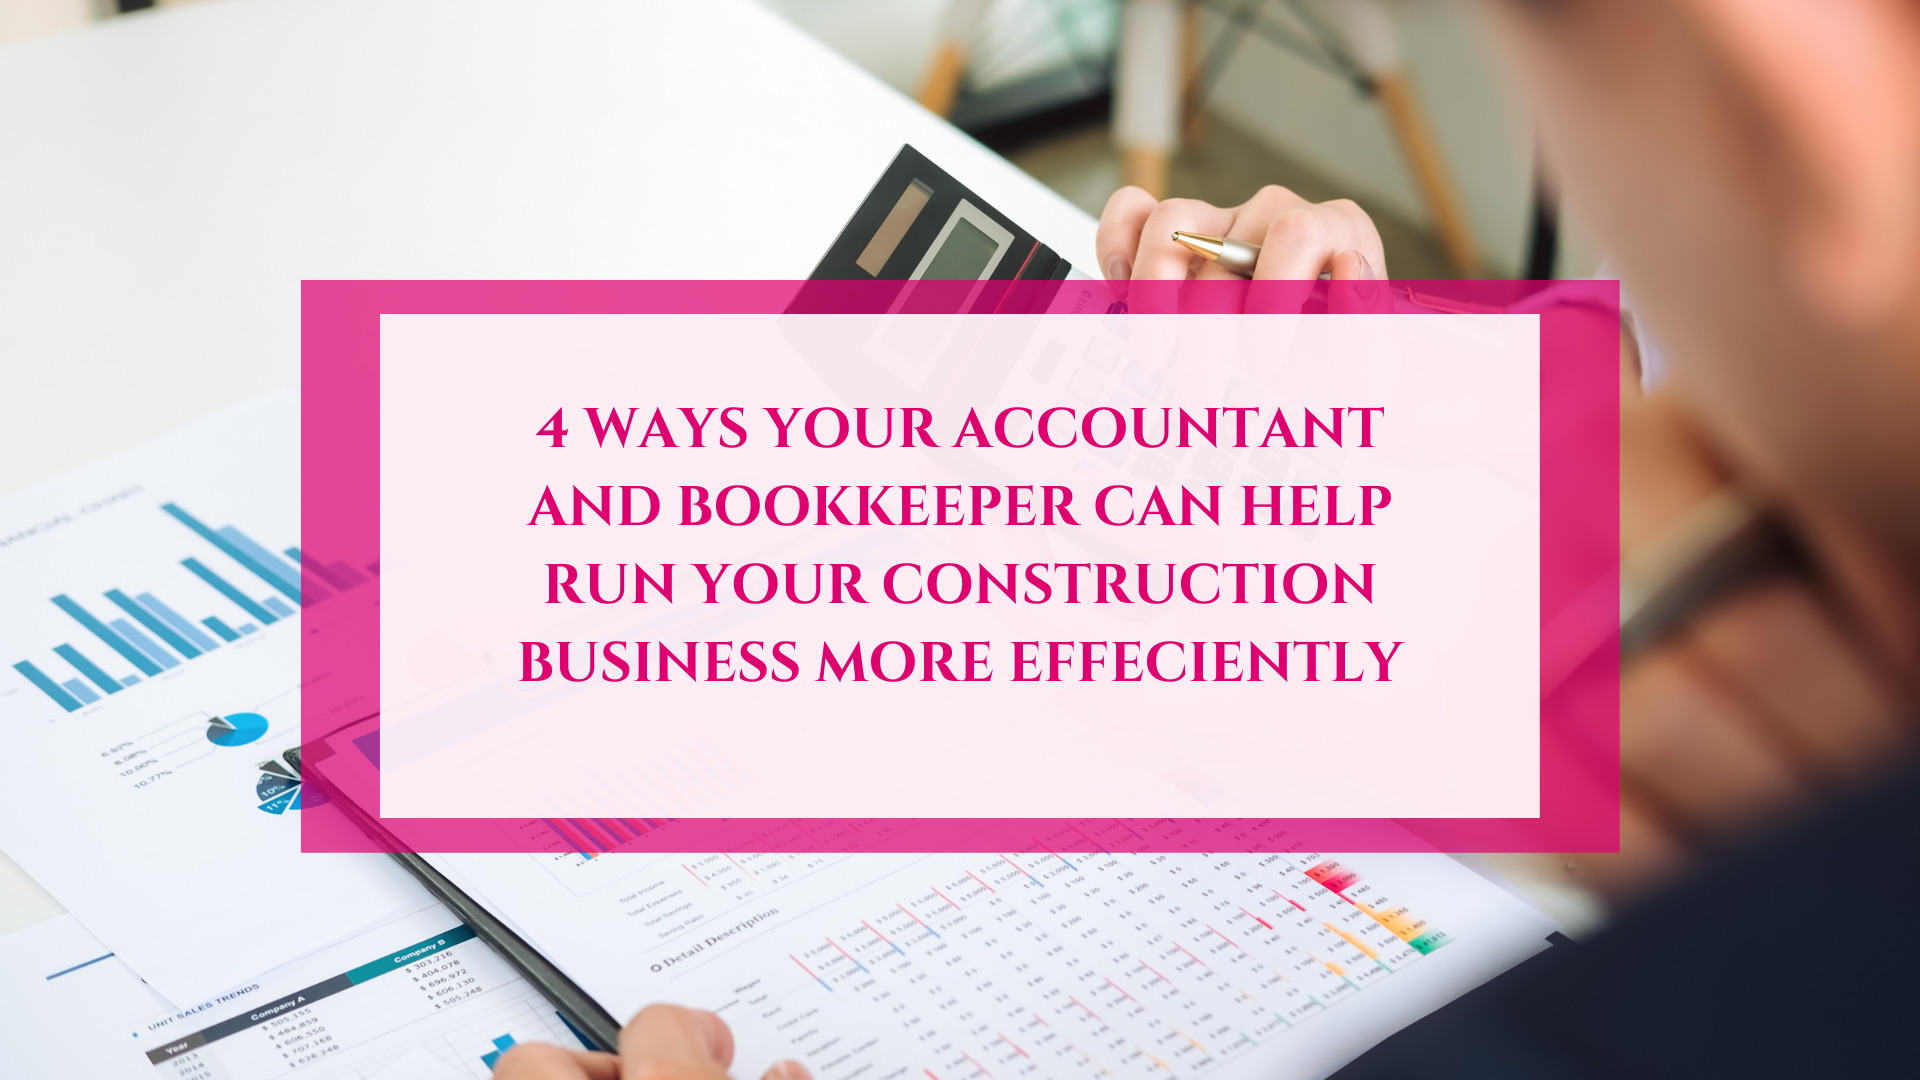 4 ways your accountant and bookkeeper can help you run your construction business more efficiently